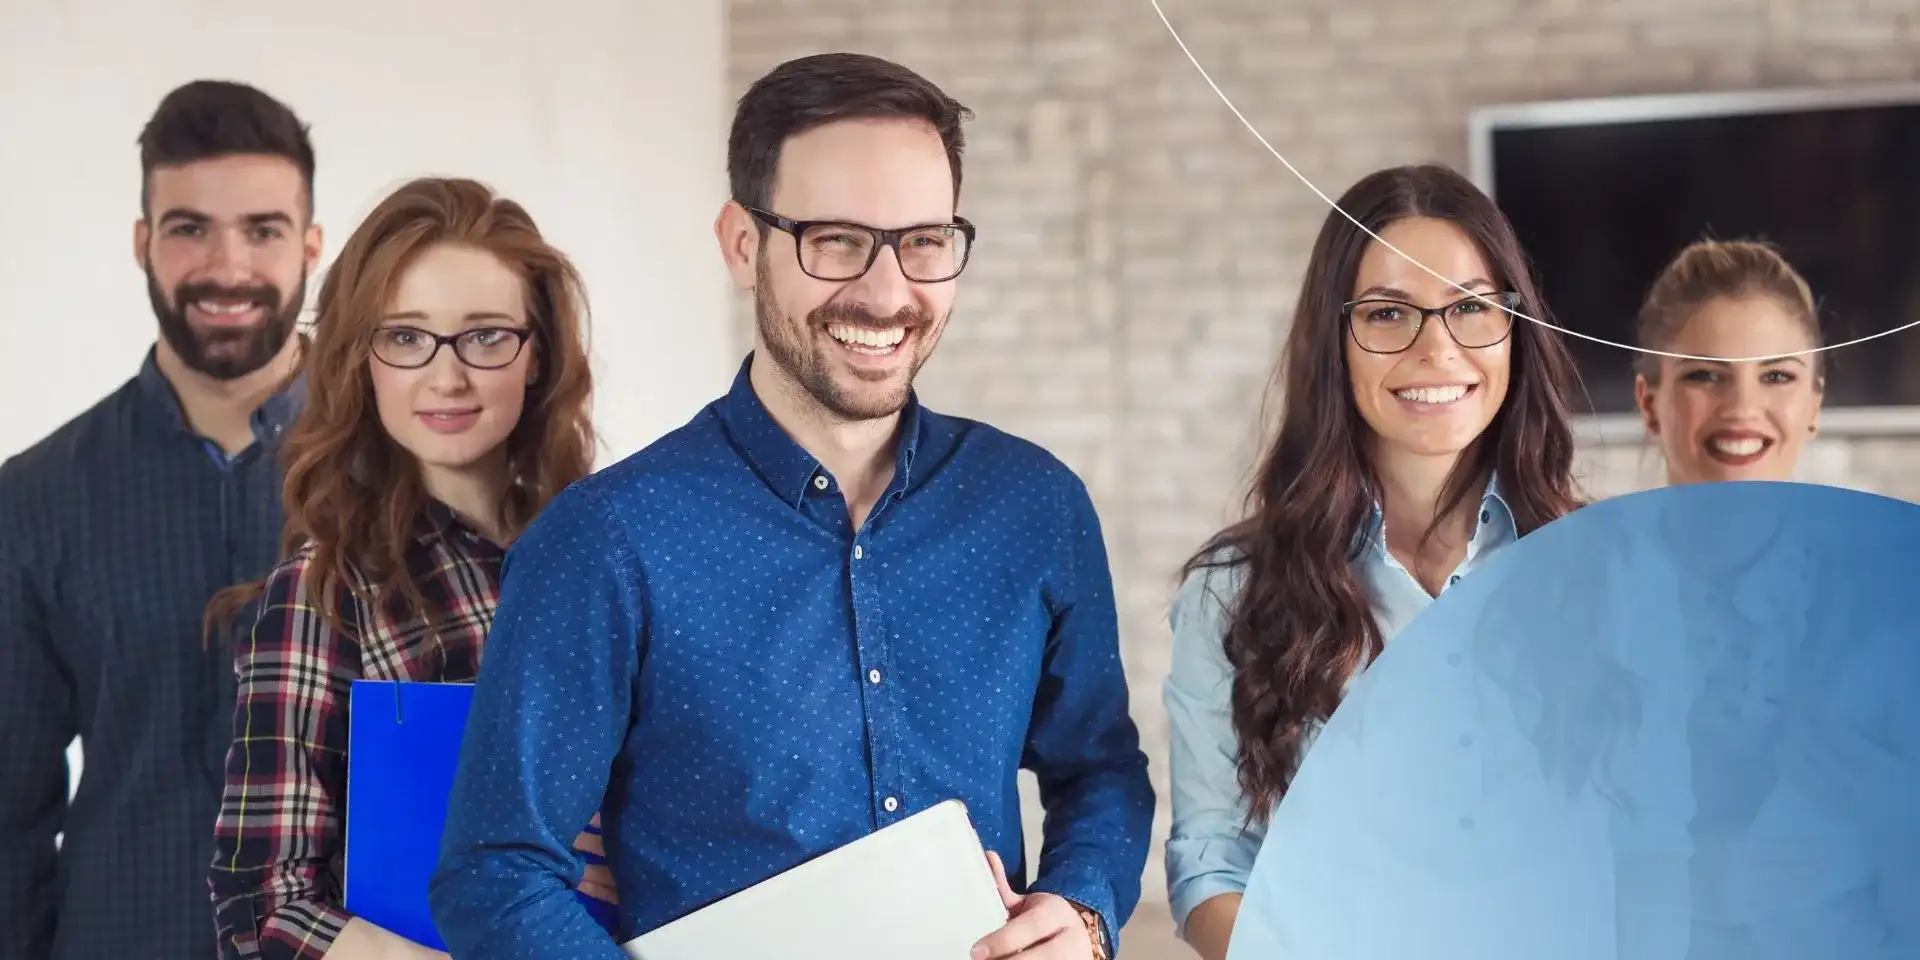 Man wearing glasses smiling with other people standing around him smiling 